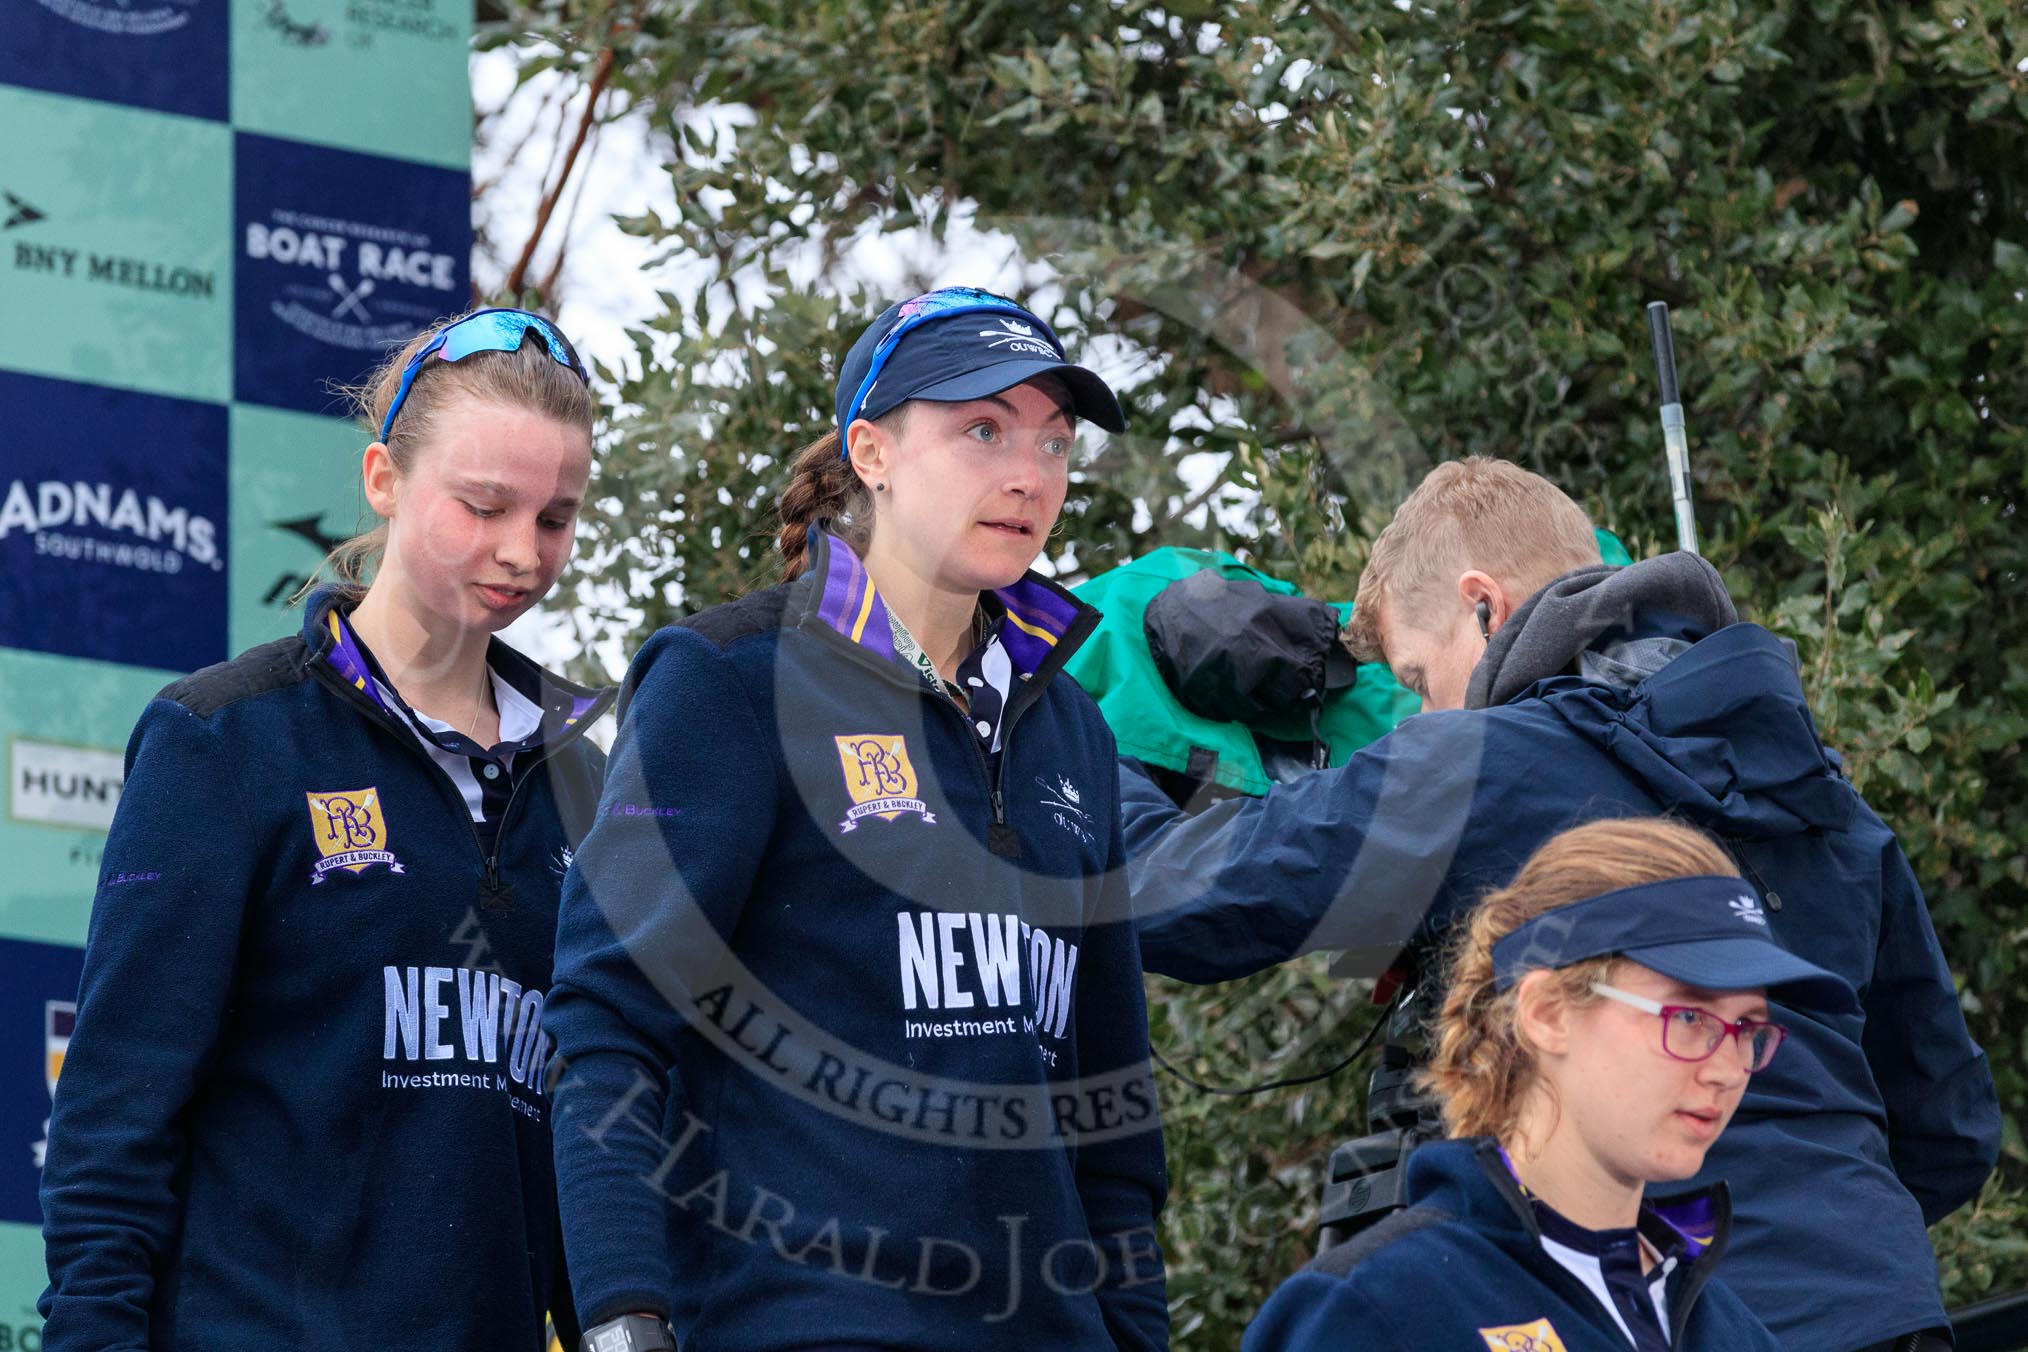 The Cancer Research UK Women's Boat Race 2018: Stepping down from the podium after the race - Oxford' s 3 seat Juliette Perry, 2 Katherine Erickson, and bow Renée Koolschijn.
River Thames between Putney Bridge and Mortlake,
London SW15,

United Kingdom,
on 24 March 2018 at 17:05, image #238